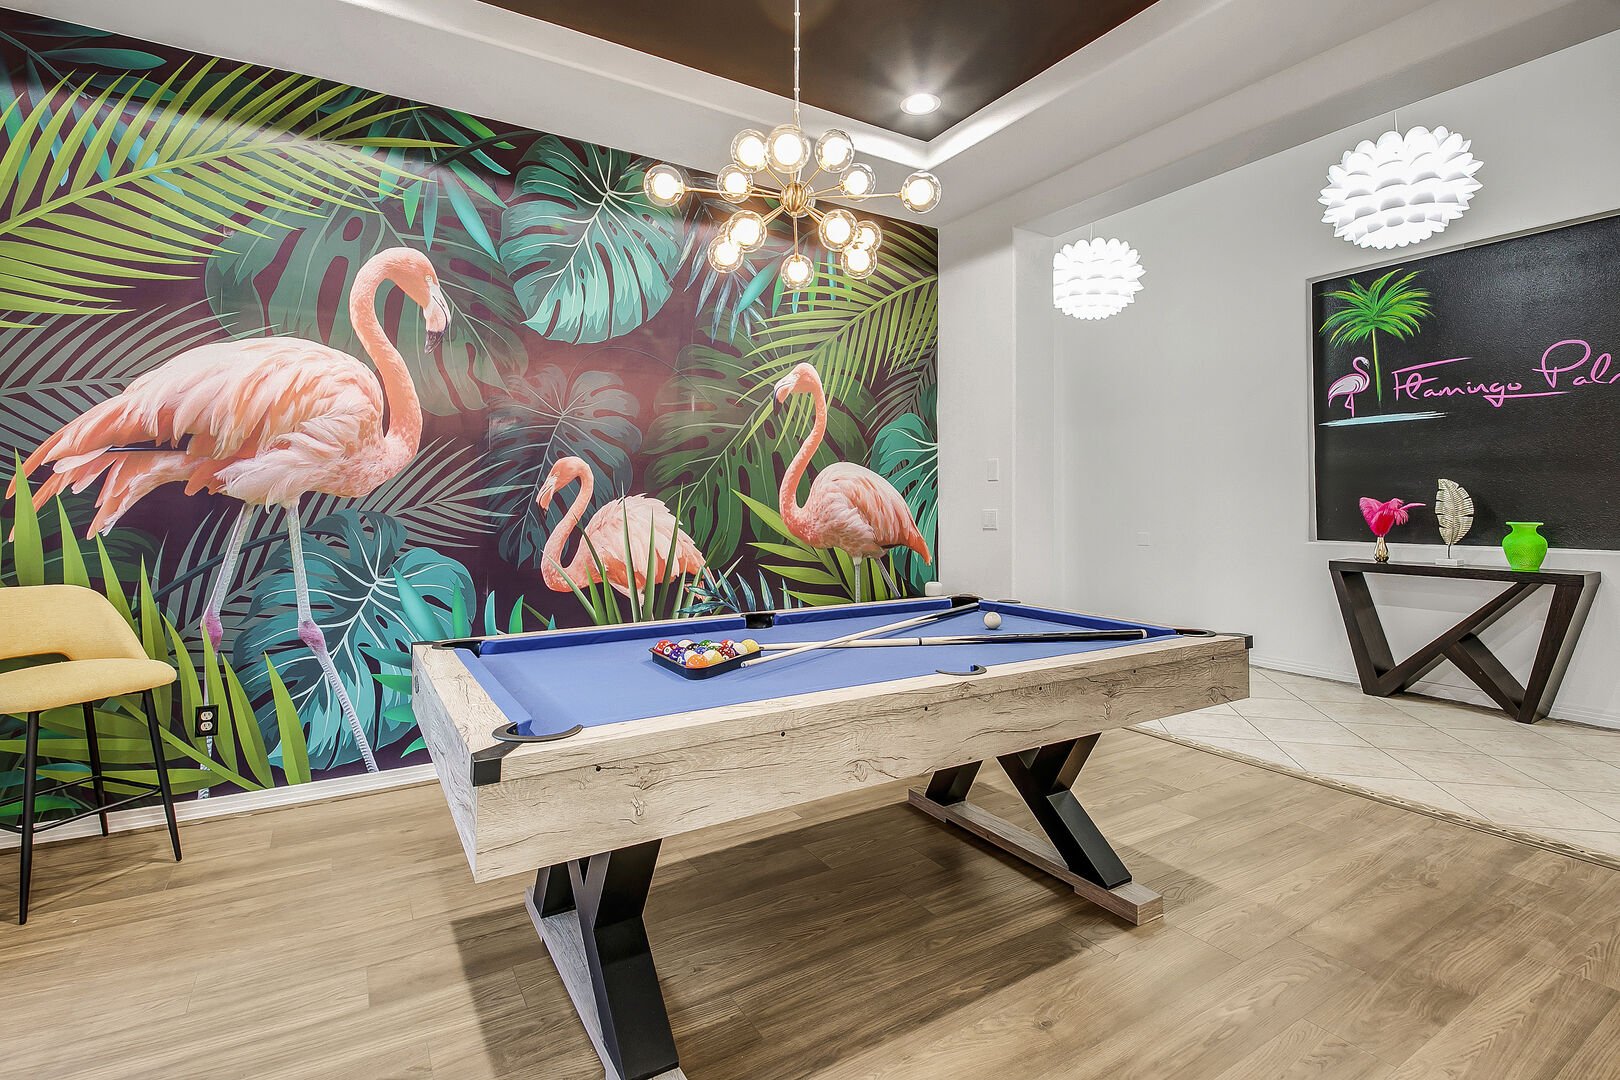 The game room features a pleasing tropical wallpaper mural perfect for your vacation getaway.